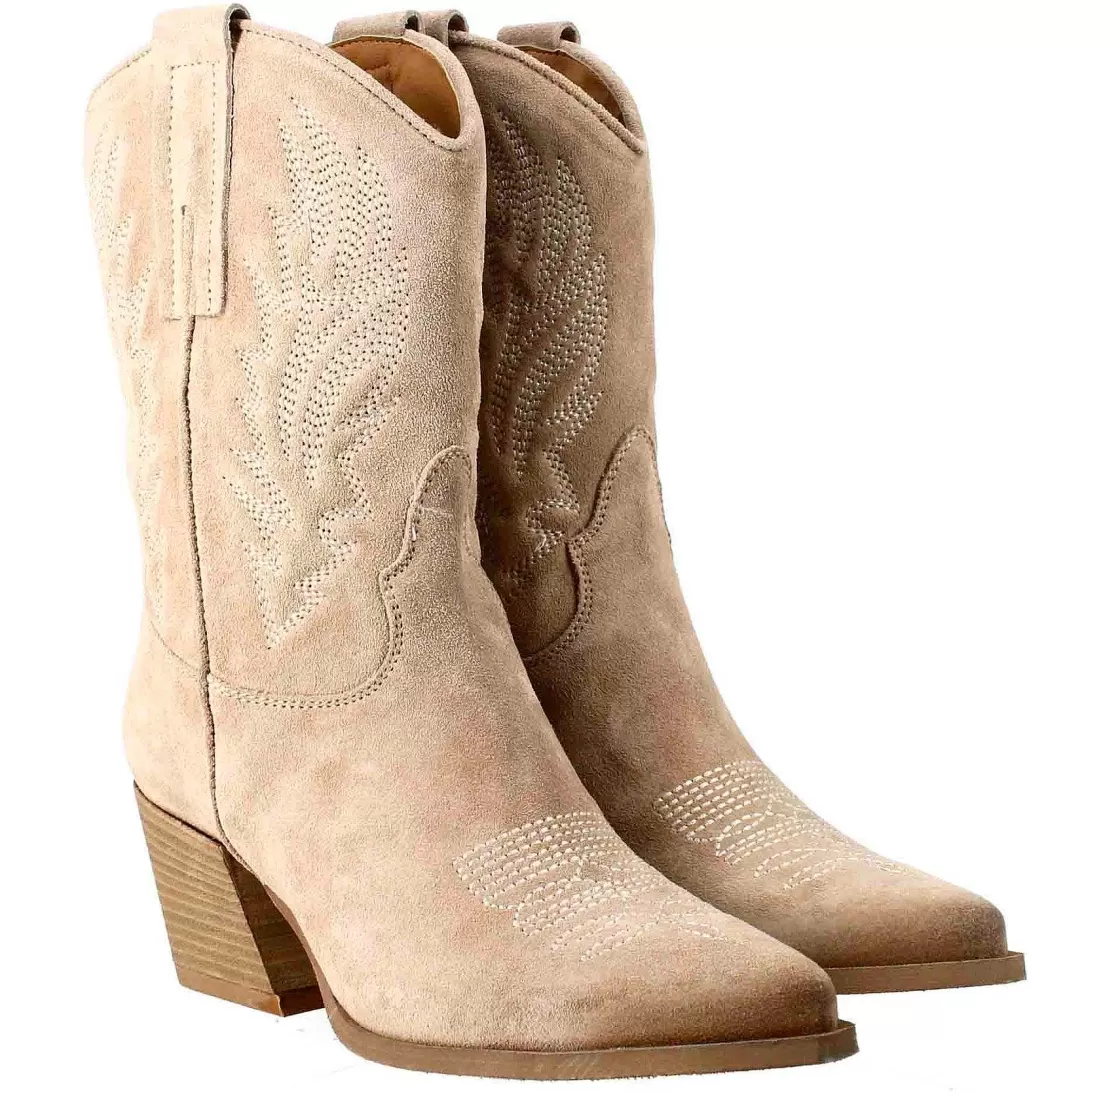 Leonardo Women'S Low Texan Boots In Beige Suede With Embroidery. Flash Sale